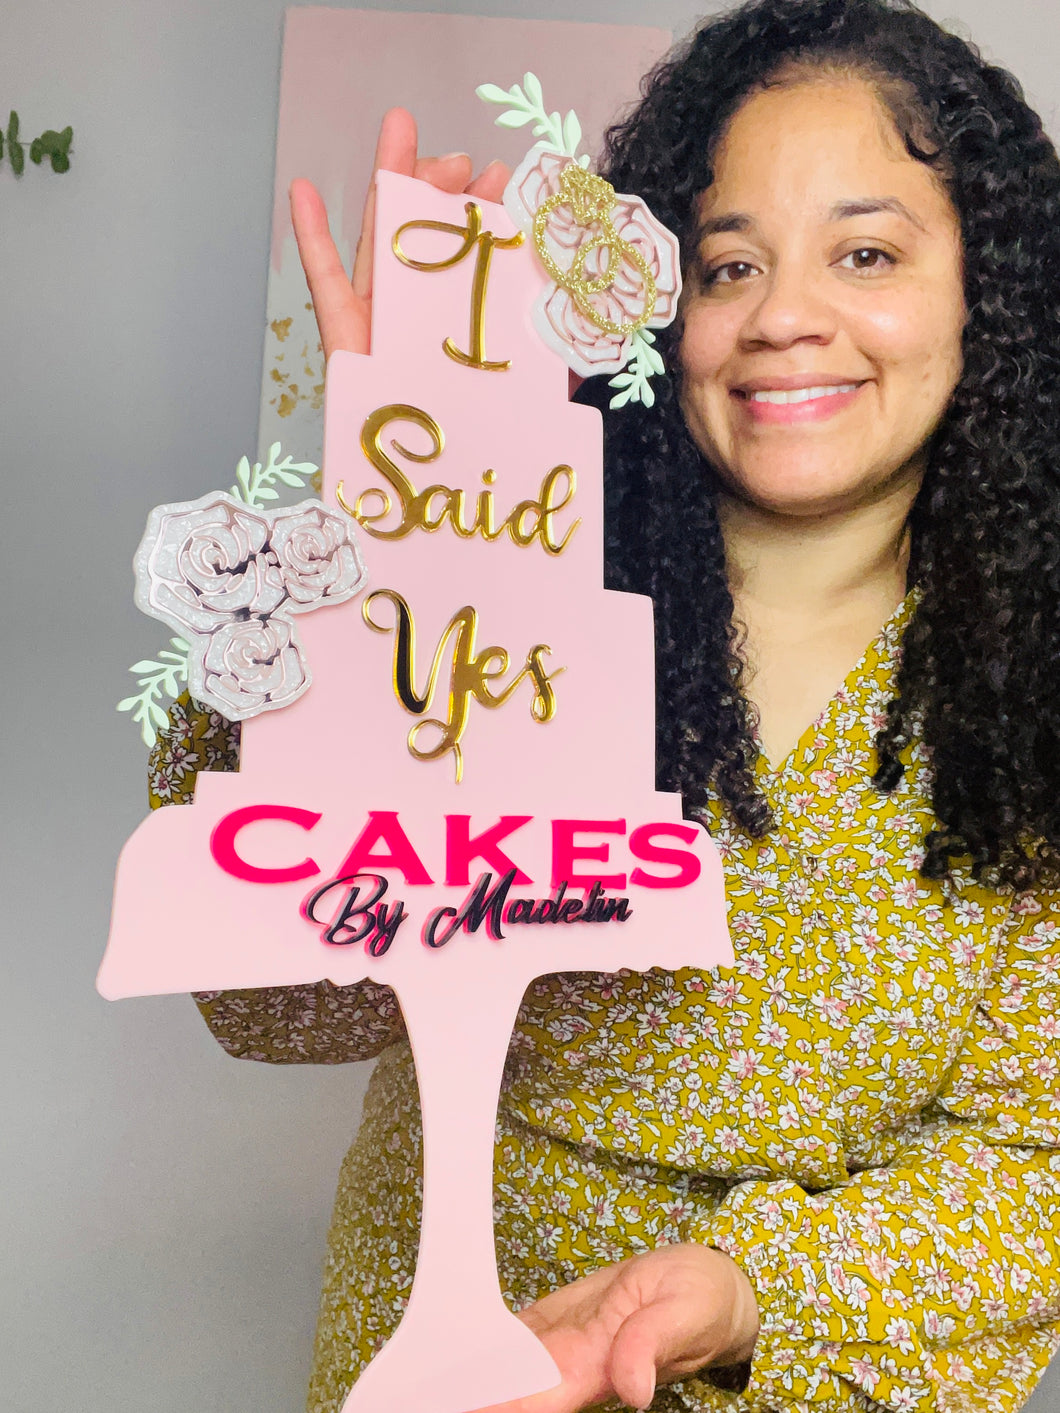 I said yes to the cake Sign